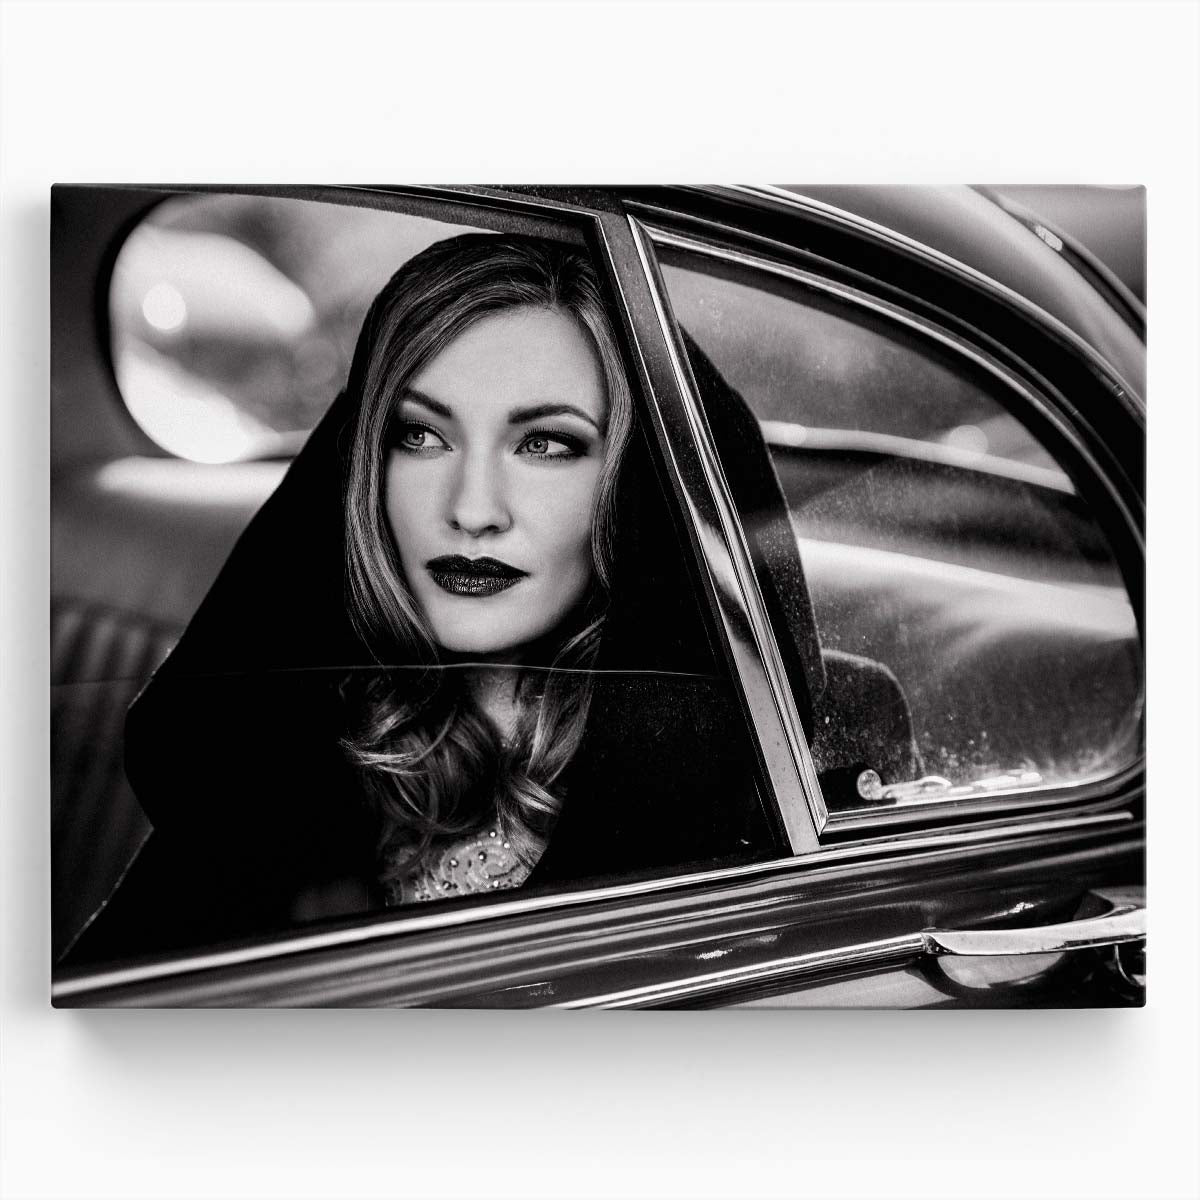 Vintage Woman in Classic Car Monochrome Portrait Photography Wall Art by Luxuriance Designs. Made in USA.